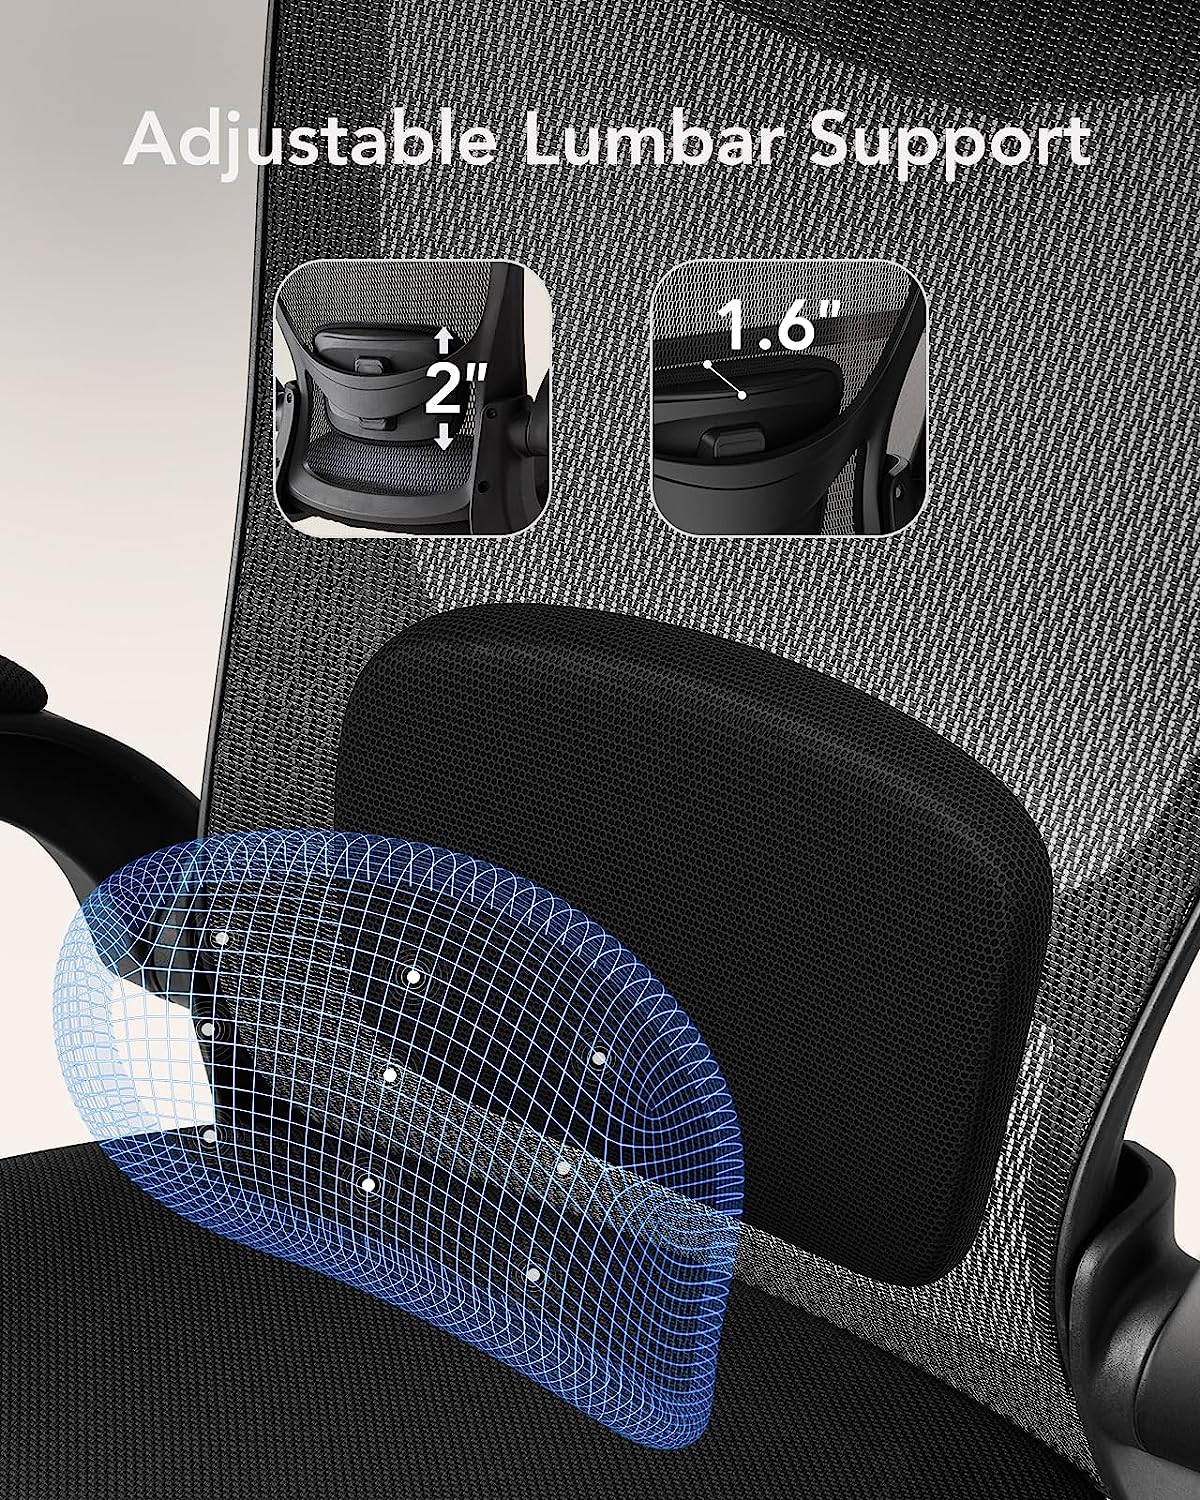 Ergonomic Office Chair With Adjustable Lumbar Support – Huanuo